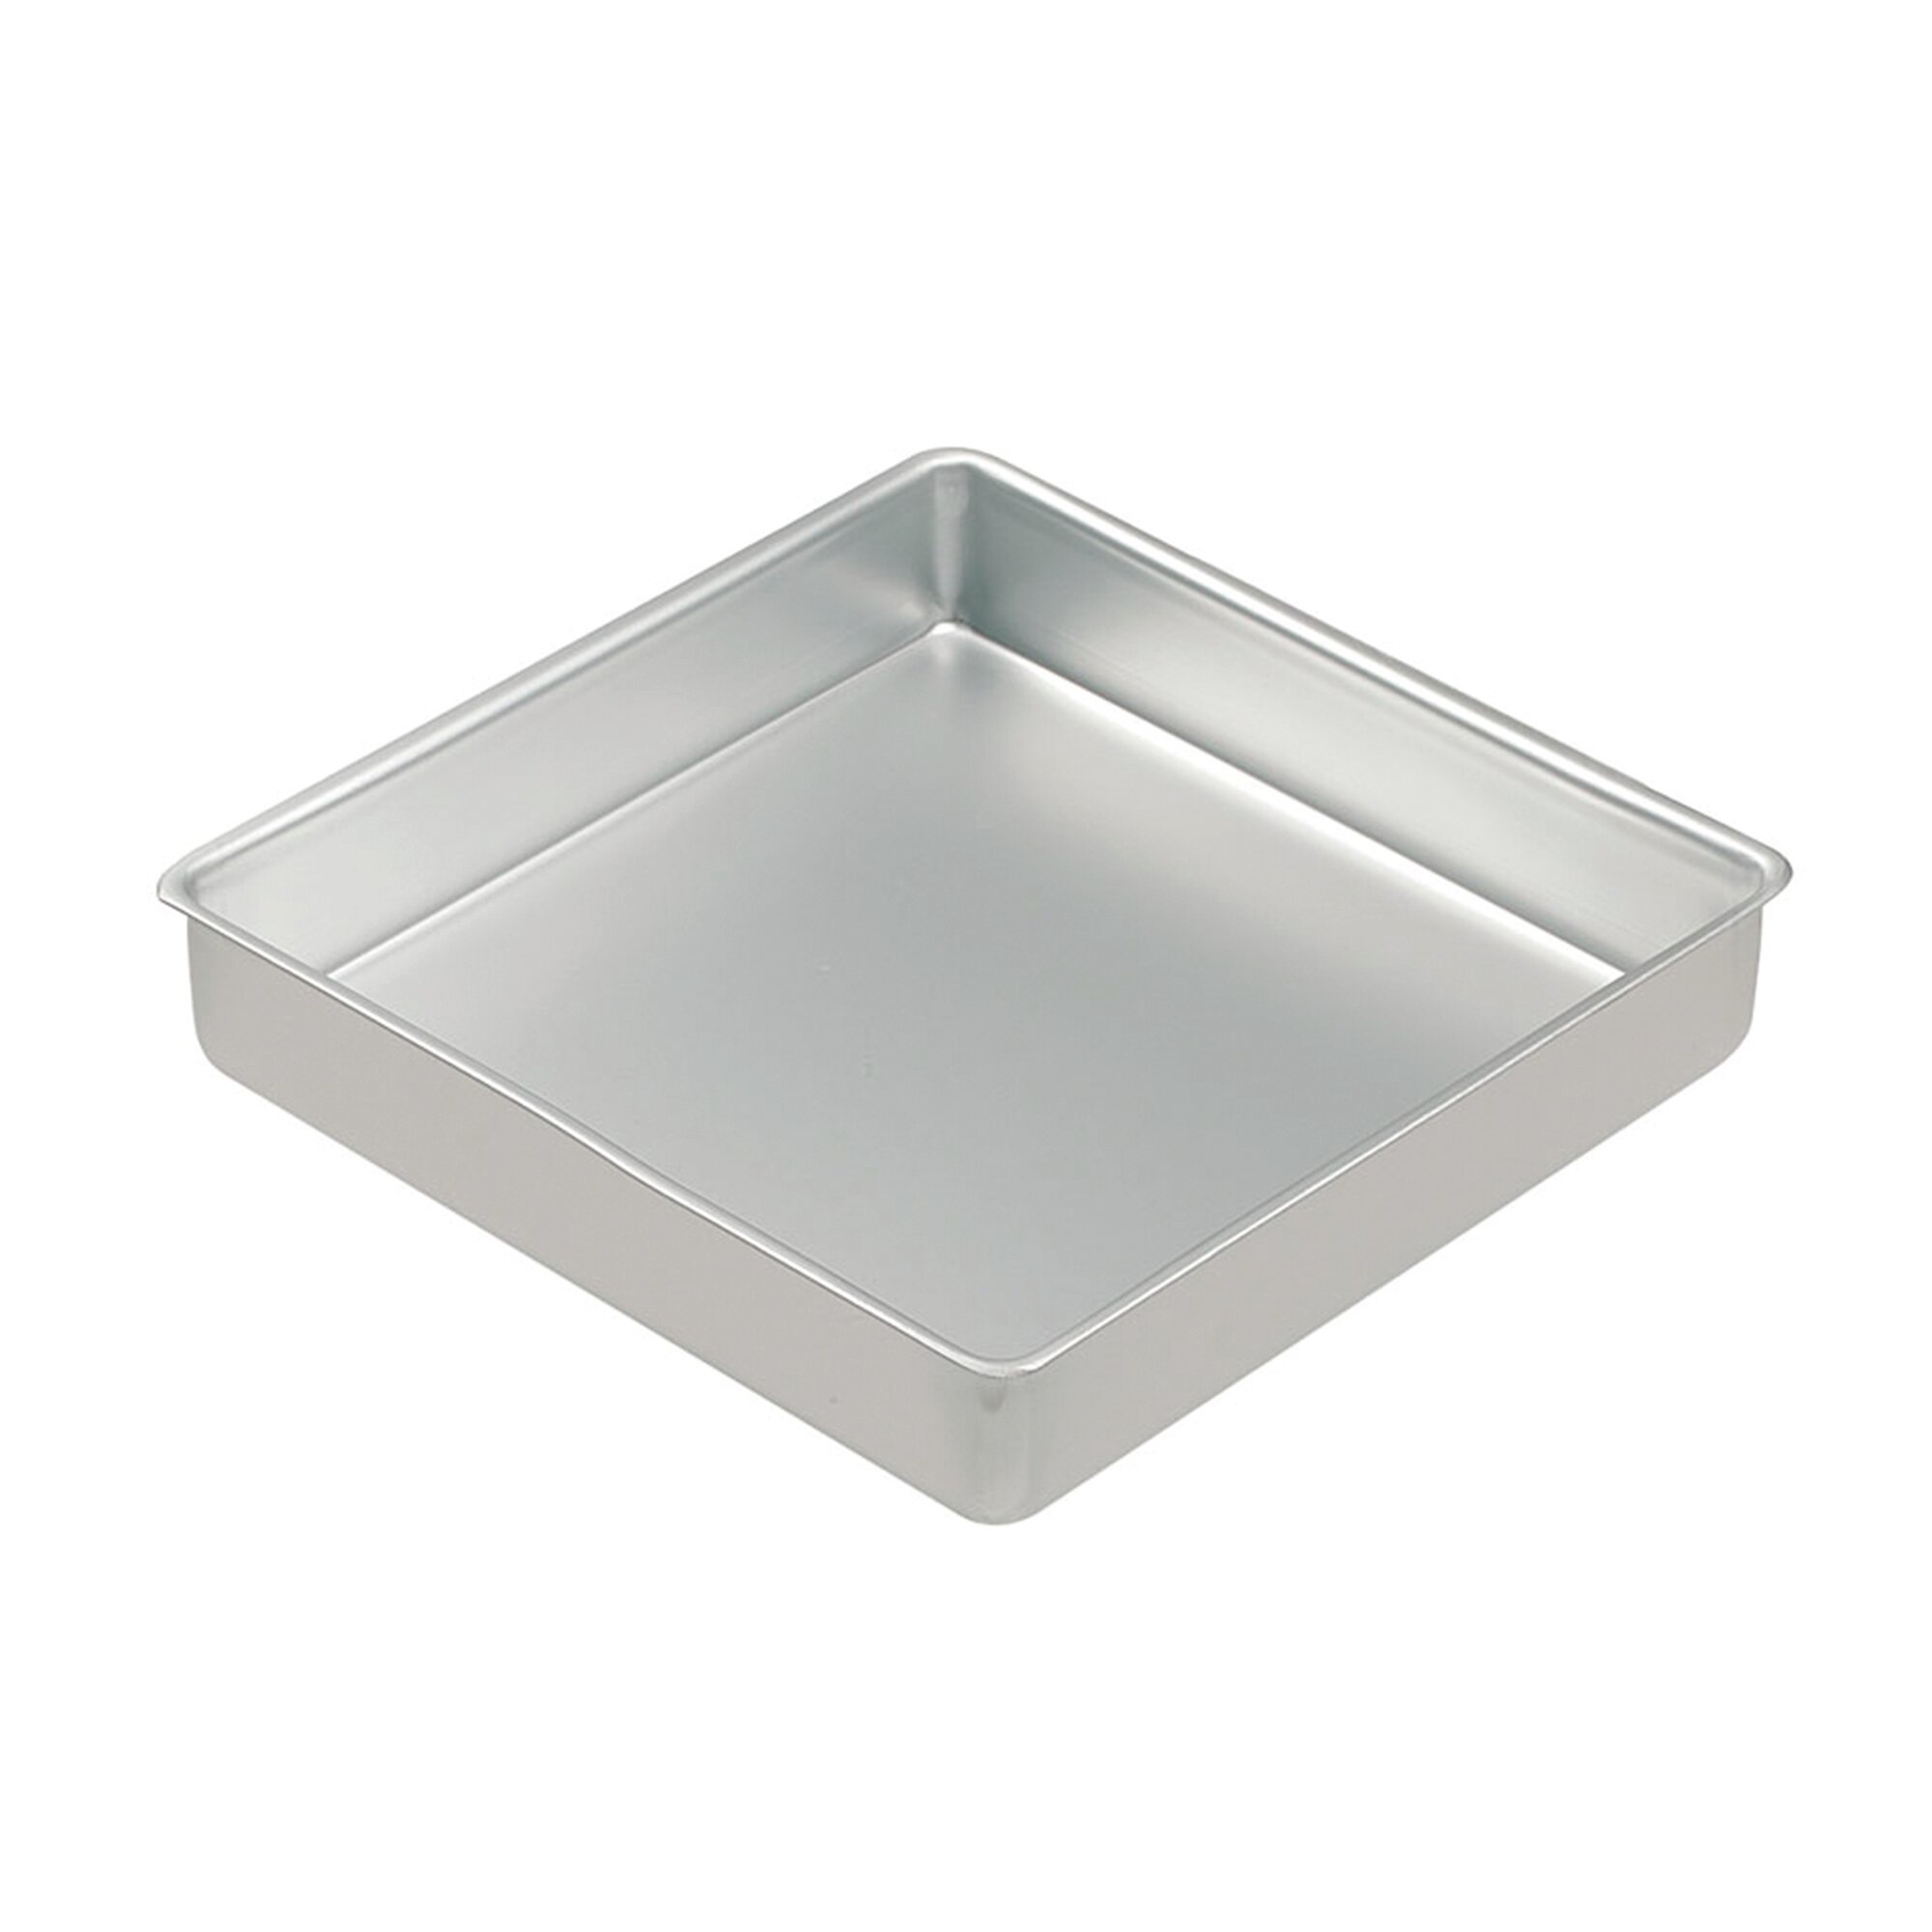 10x3 1/4 inch Round Cake Tin with Solid Base | Silverwood Bakeware